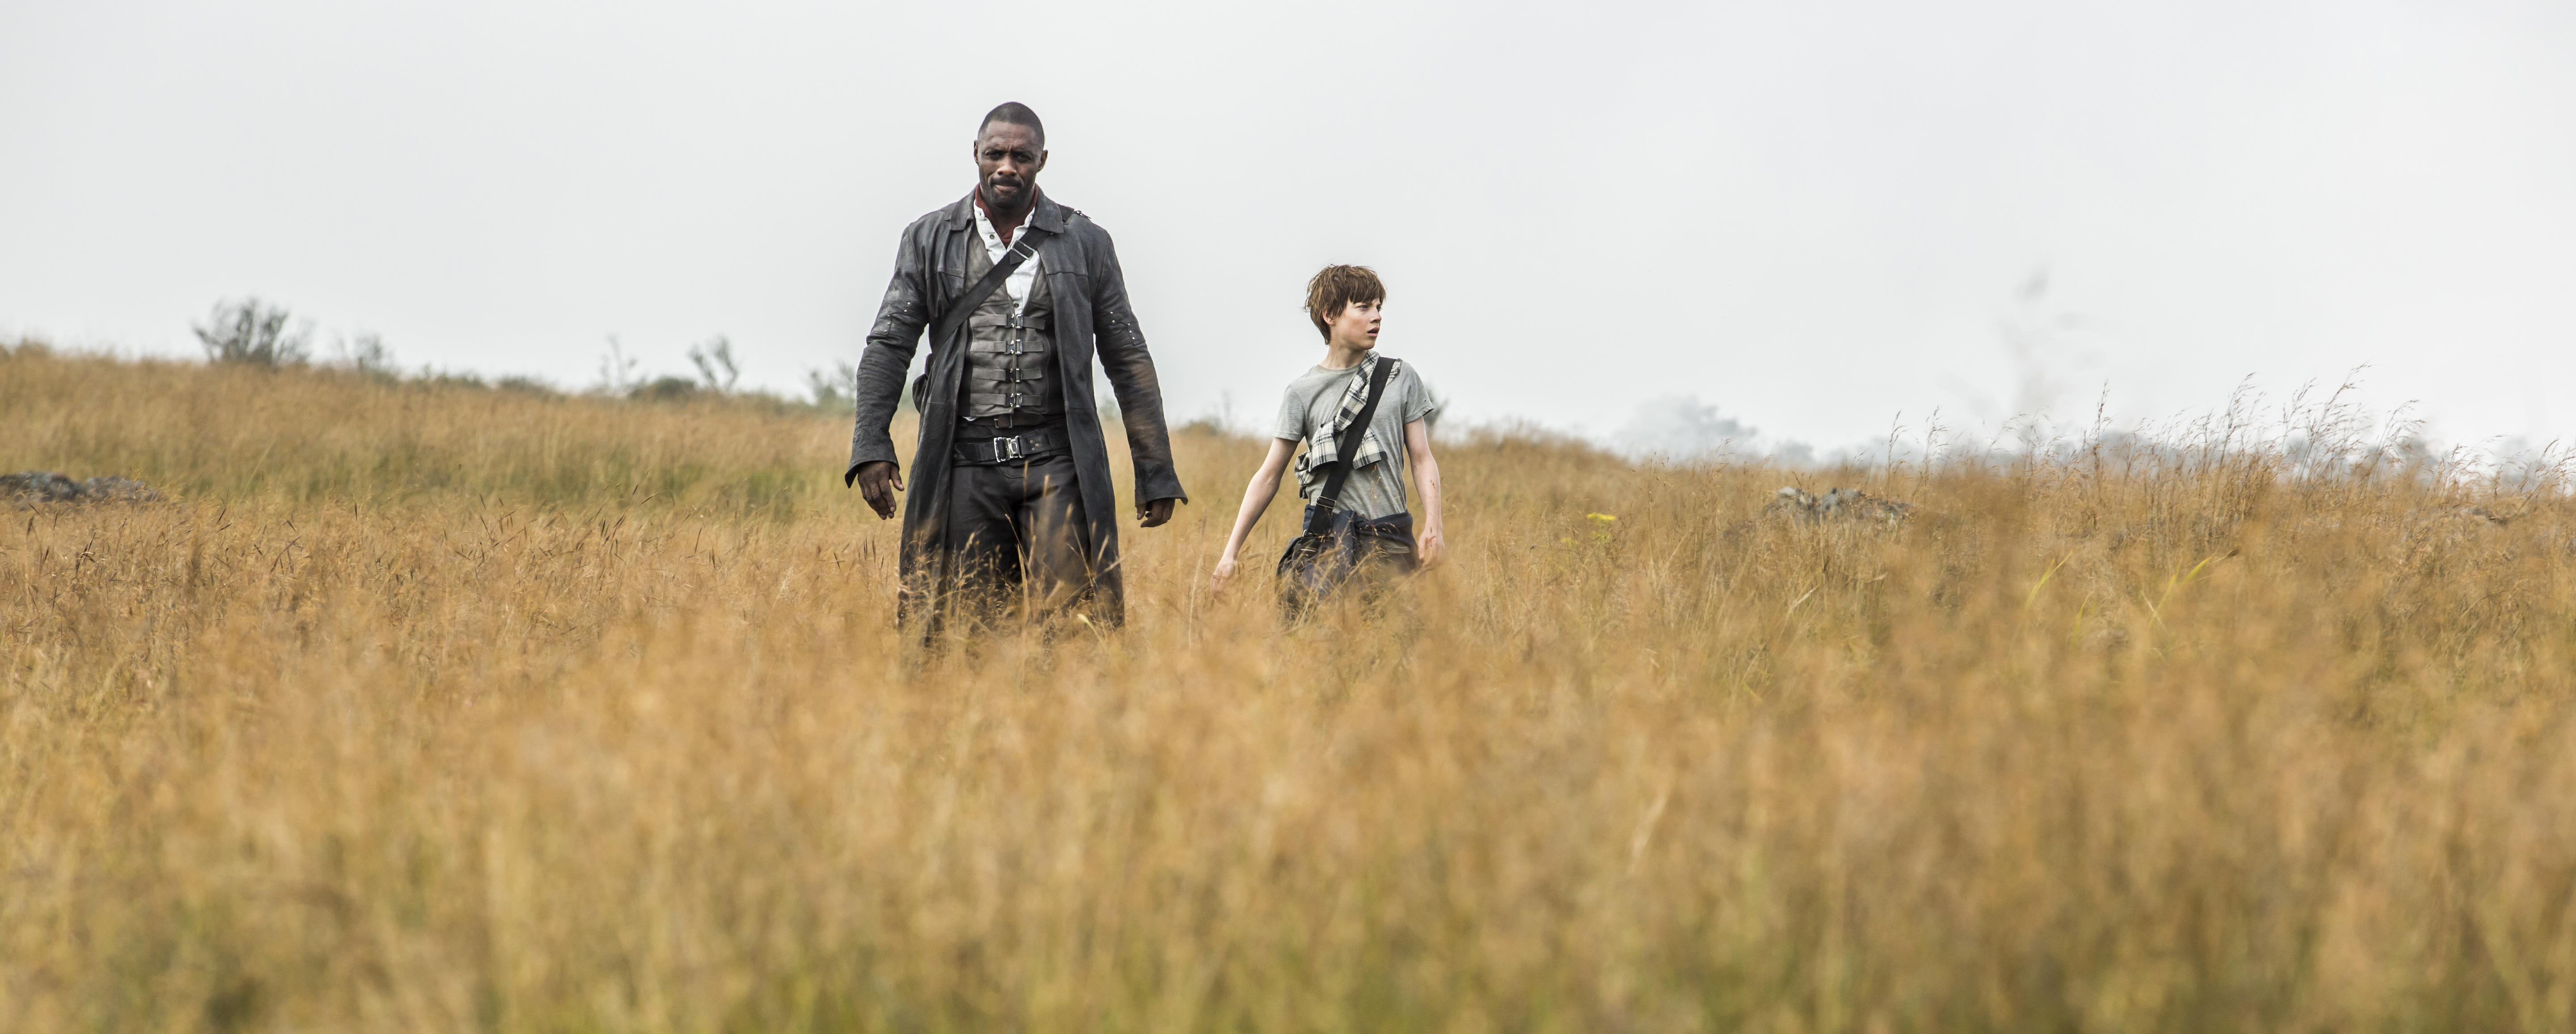 ‘The Dark Tower’ Trailer is Finally Here